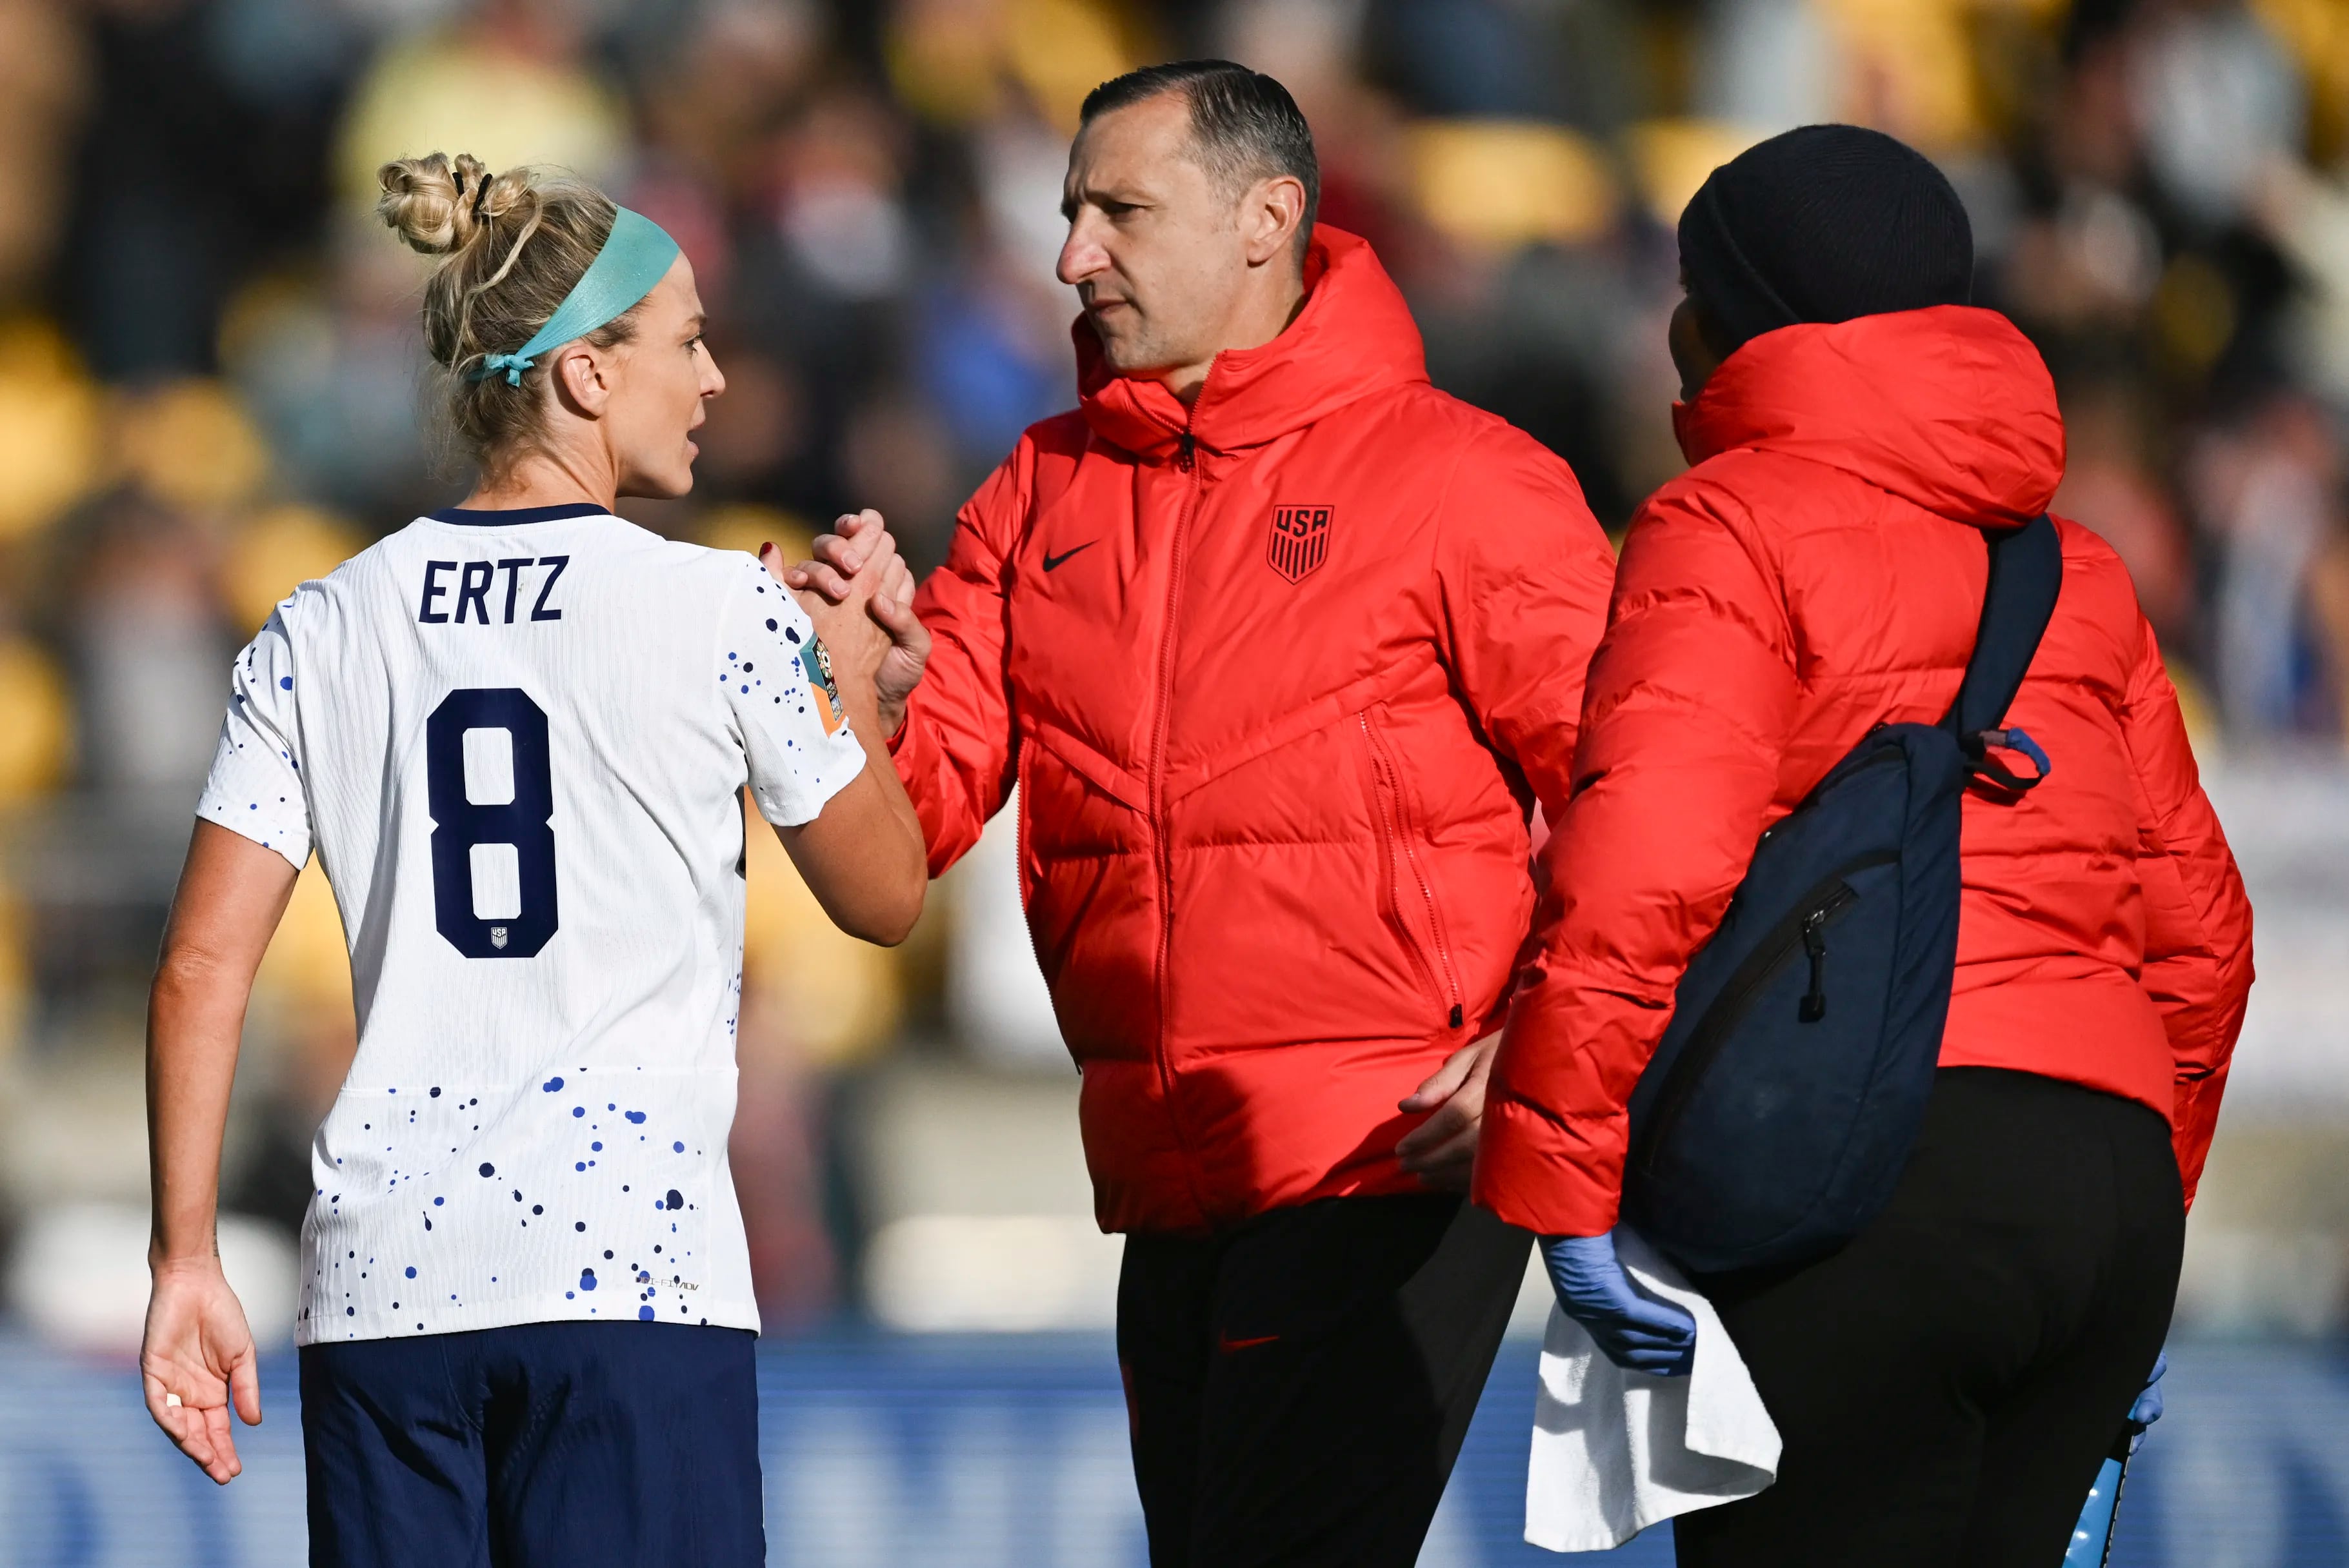 Vlatko Andonovski (center) with Julie Ertz (left) at the U.S.-Netherlands game that ended in a tie and landed the Americans in a round of 16 matchup with perennial nemesis Sweden.